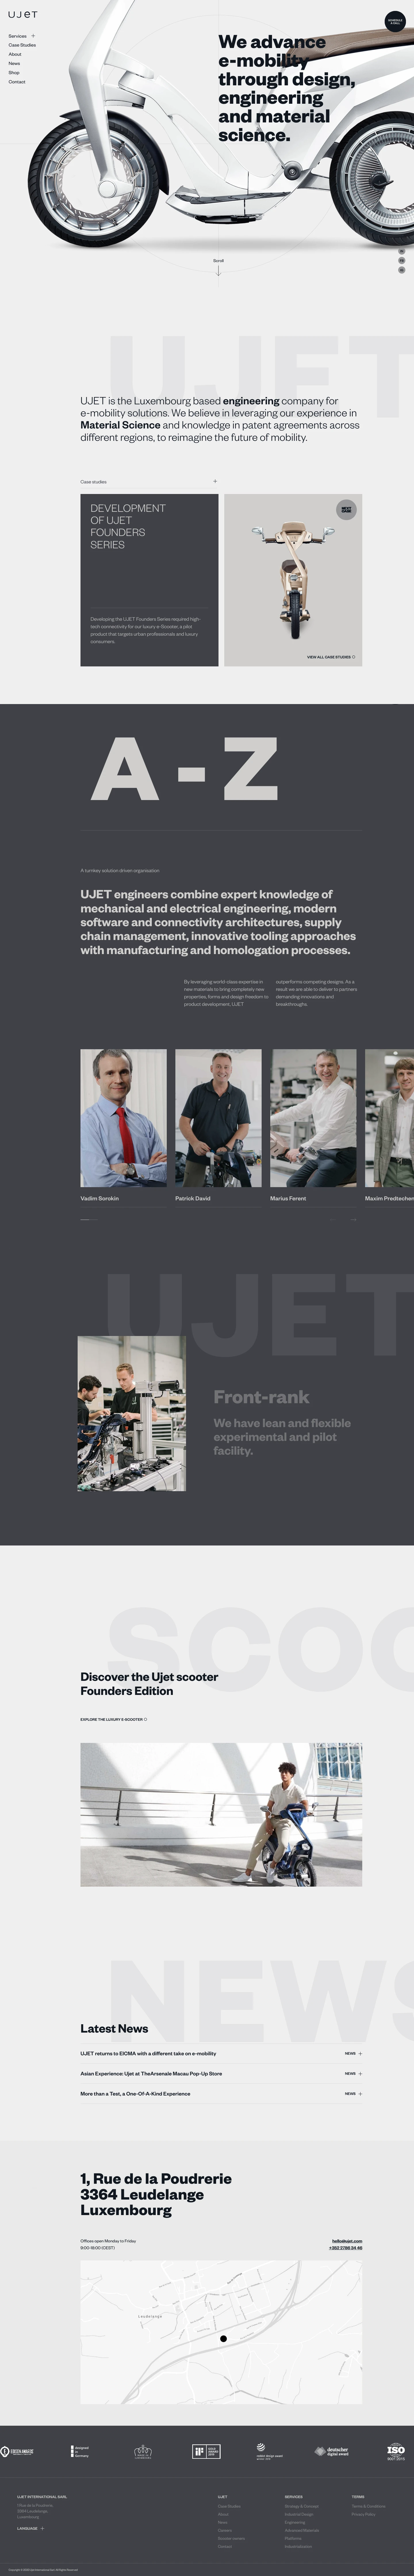 UJET Landing Page Example: UJET is a European Engineering & Design company focused on a new generation of smart and innovative electric mobility platforms.